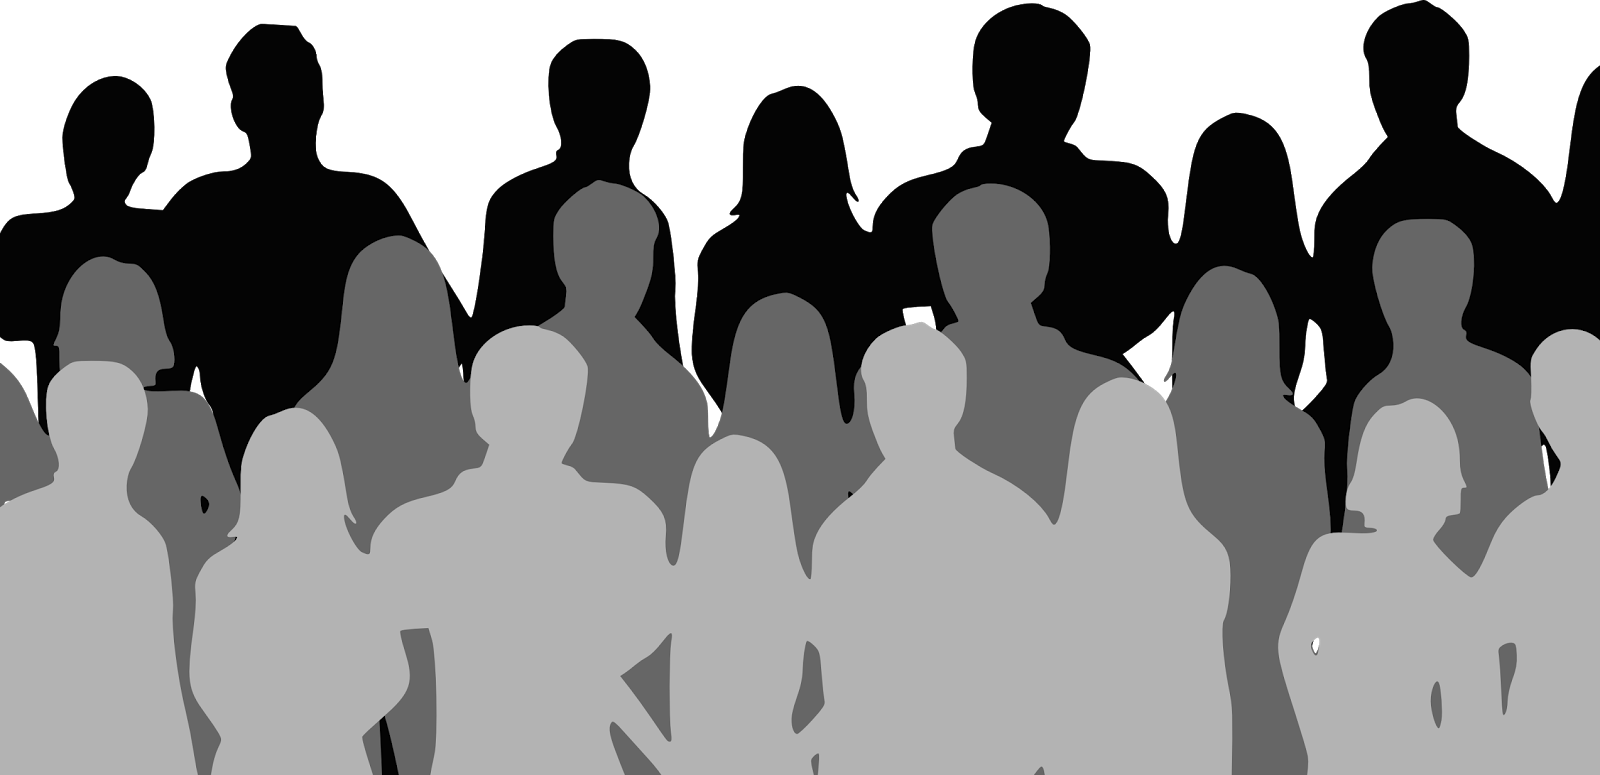 Download PNG image - Crowd Vector PNG Photo 